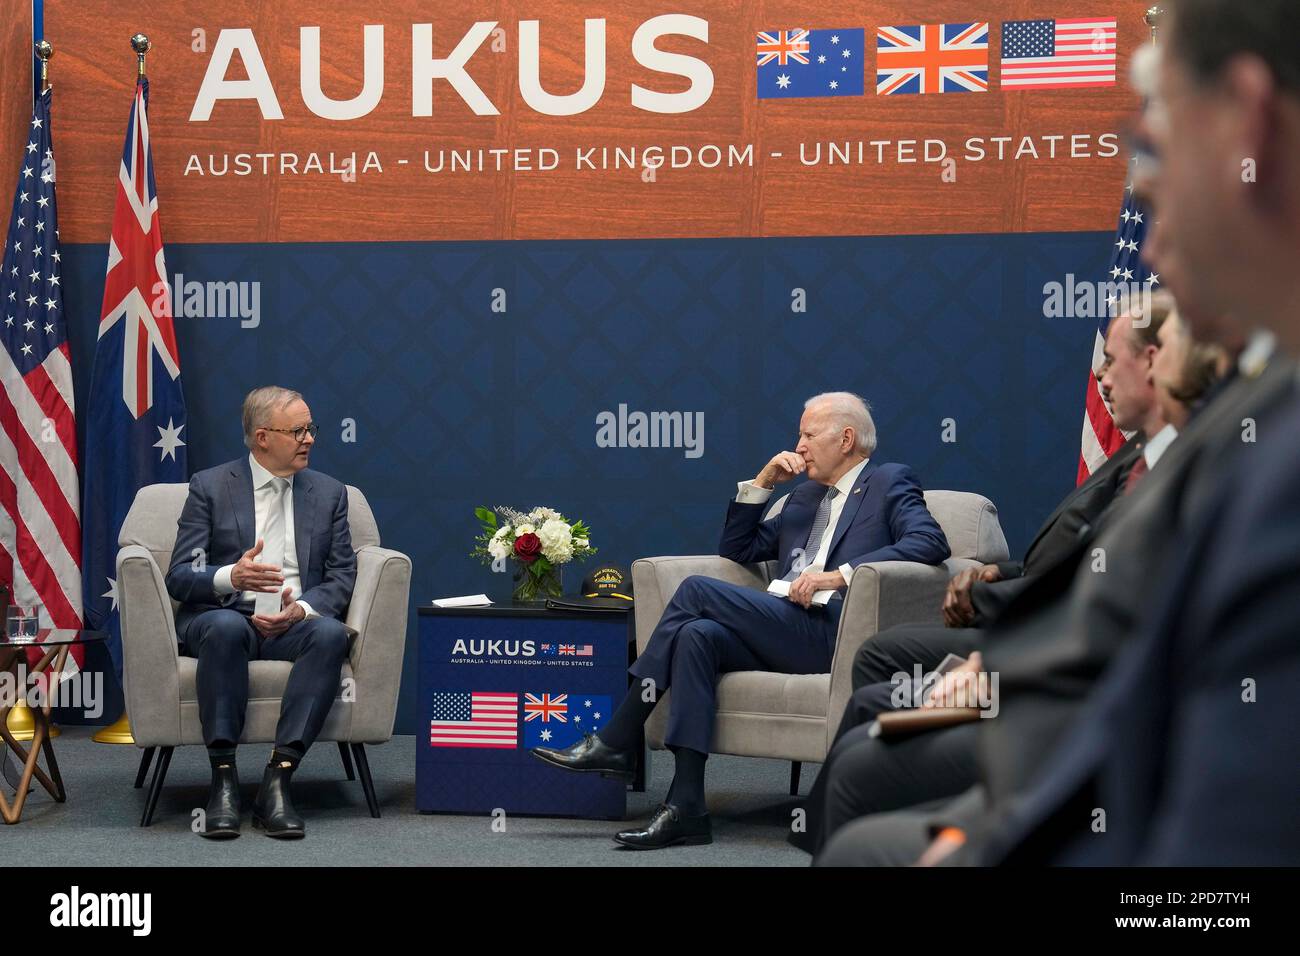 San Diego, United States of America. 13 March, 2023. U.S President Joe Biden, right, listens to Australian Prime Minister Anthony Albanese, left, during a bilateral meeting at Point Loma naval base March 13, 2023 in San Diego, California. Australia agreed under the AUKUS security pact to purchase American nuclear-powered submarines. Credit: Adam Schultz/White House Photo/Alamy Live News Stock Photo